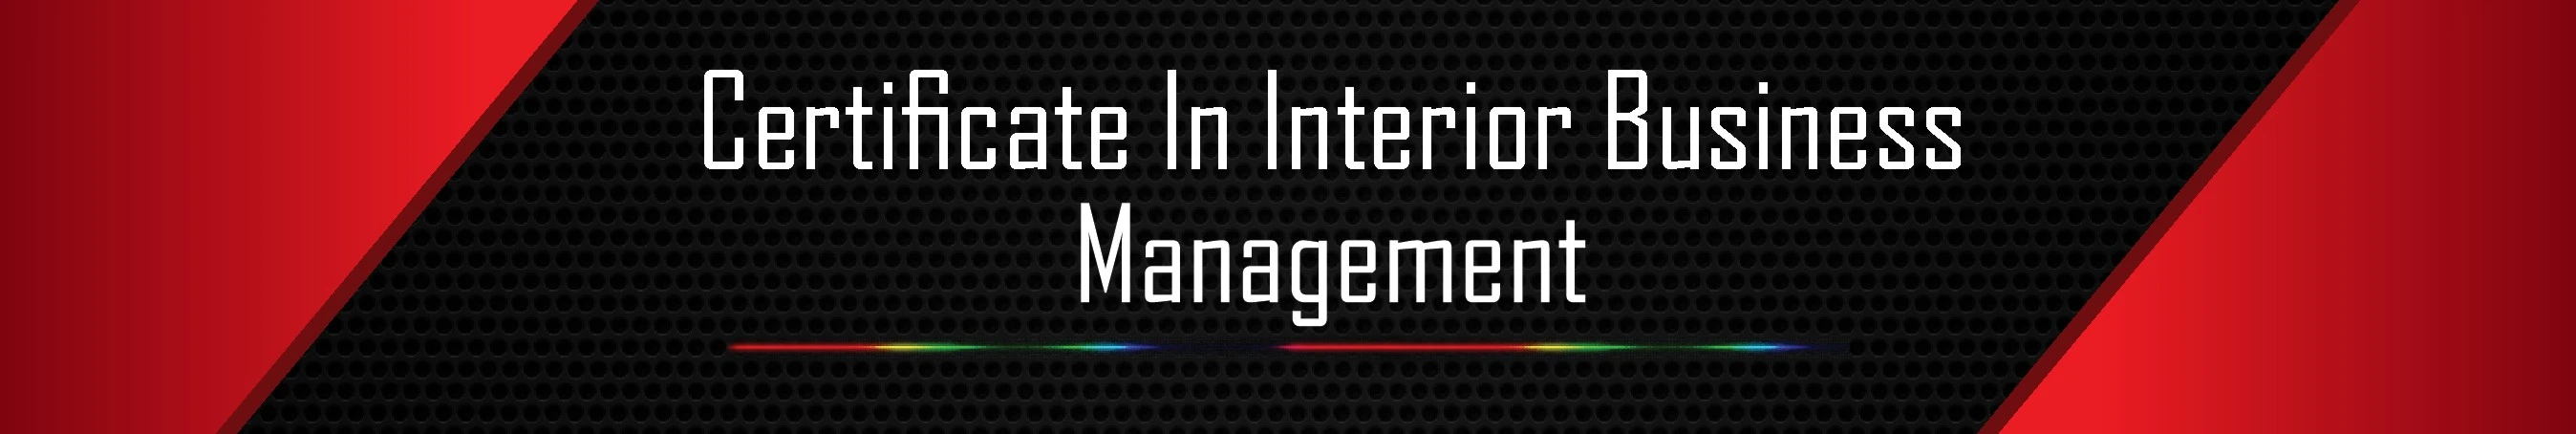 Certificate in interior business management